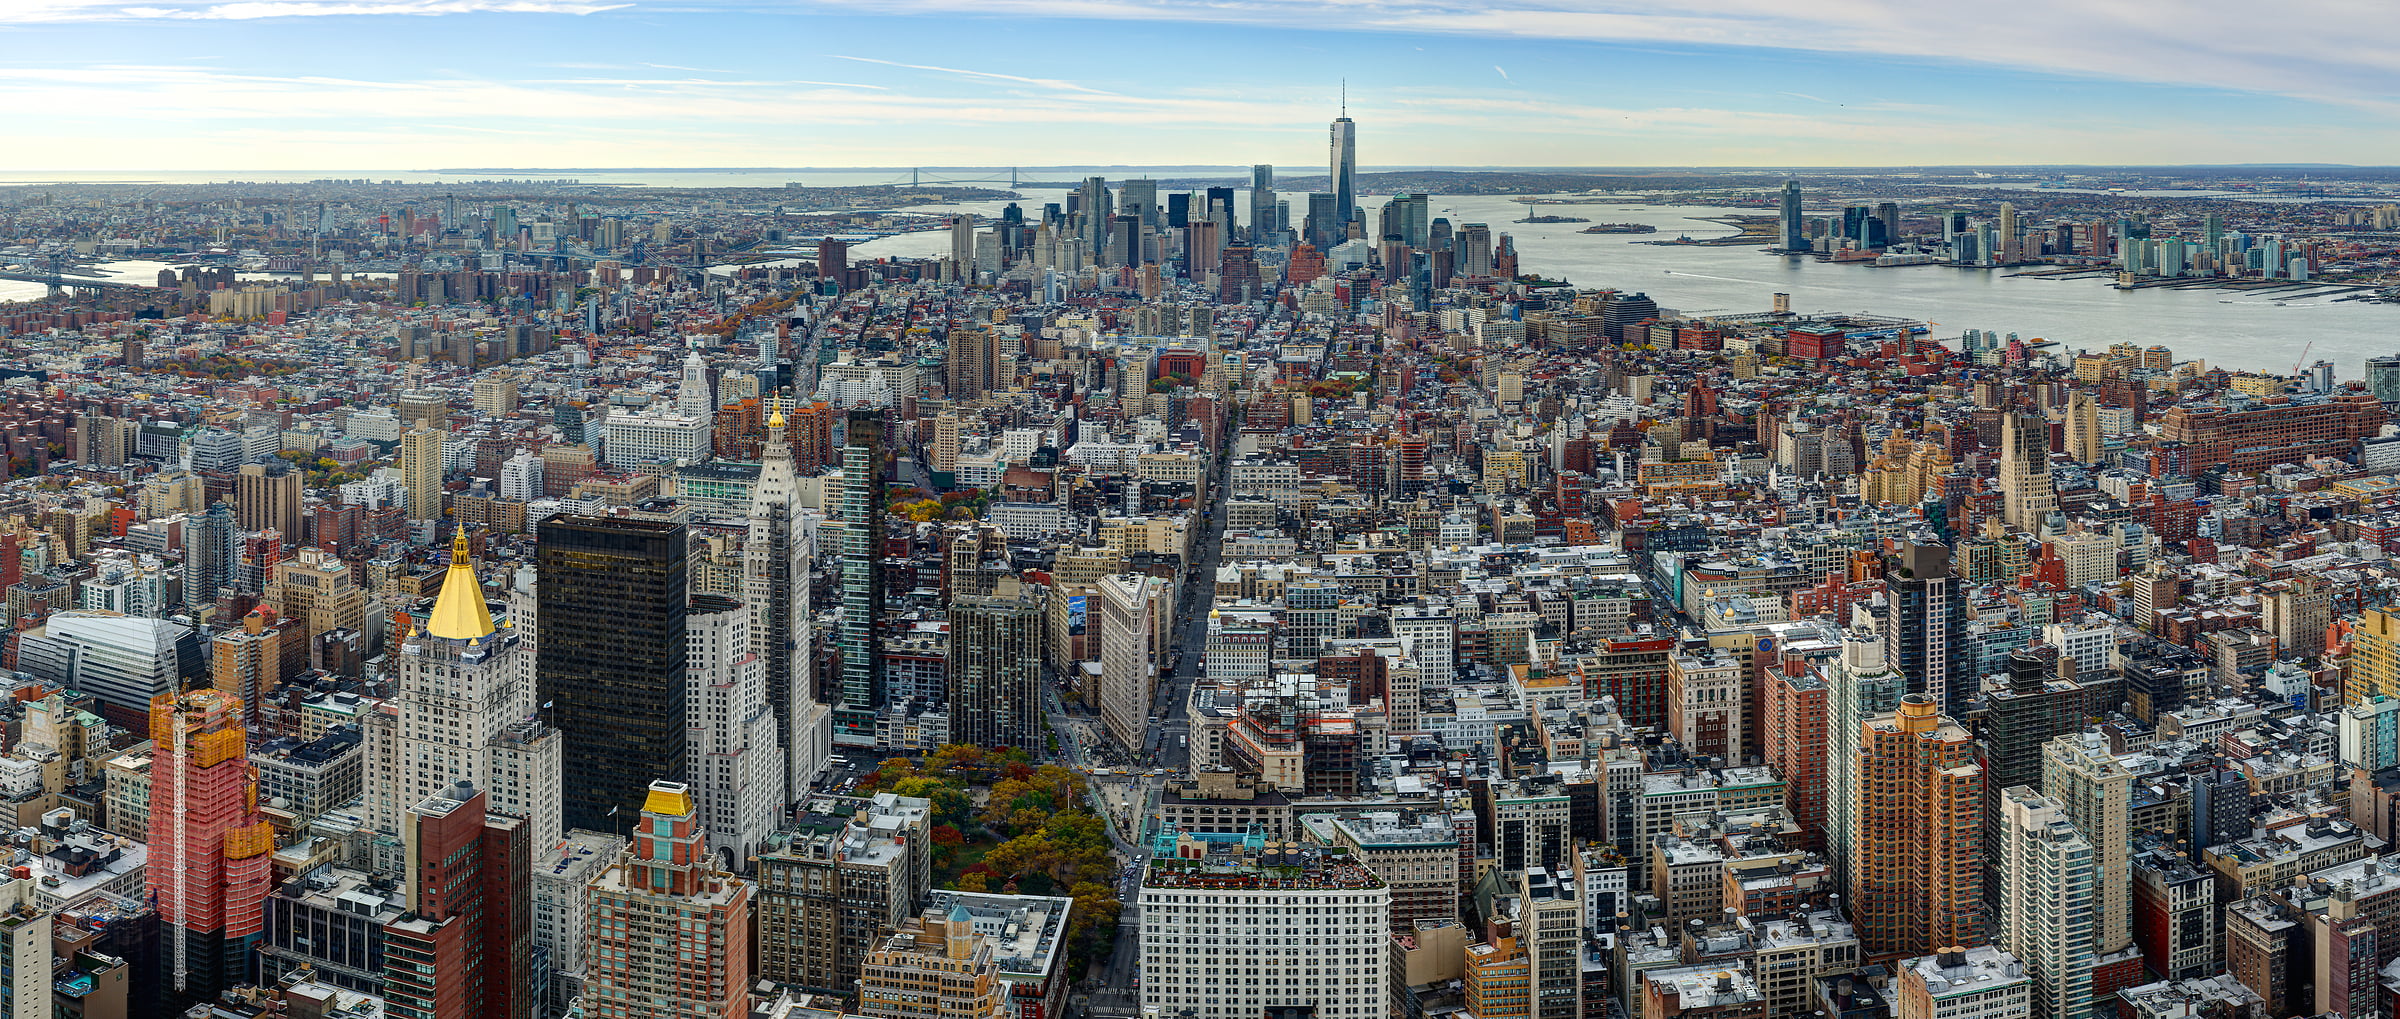 294 megapixels! A very high resolution, large-format VAST photo print of the view from the Empire State Building; aerial cityscape photograph created by Tim Lo Monaco at the Empire State Building in Manhattan, New York, New York